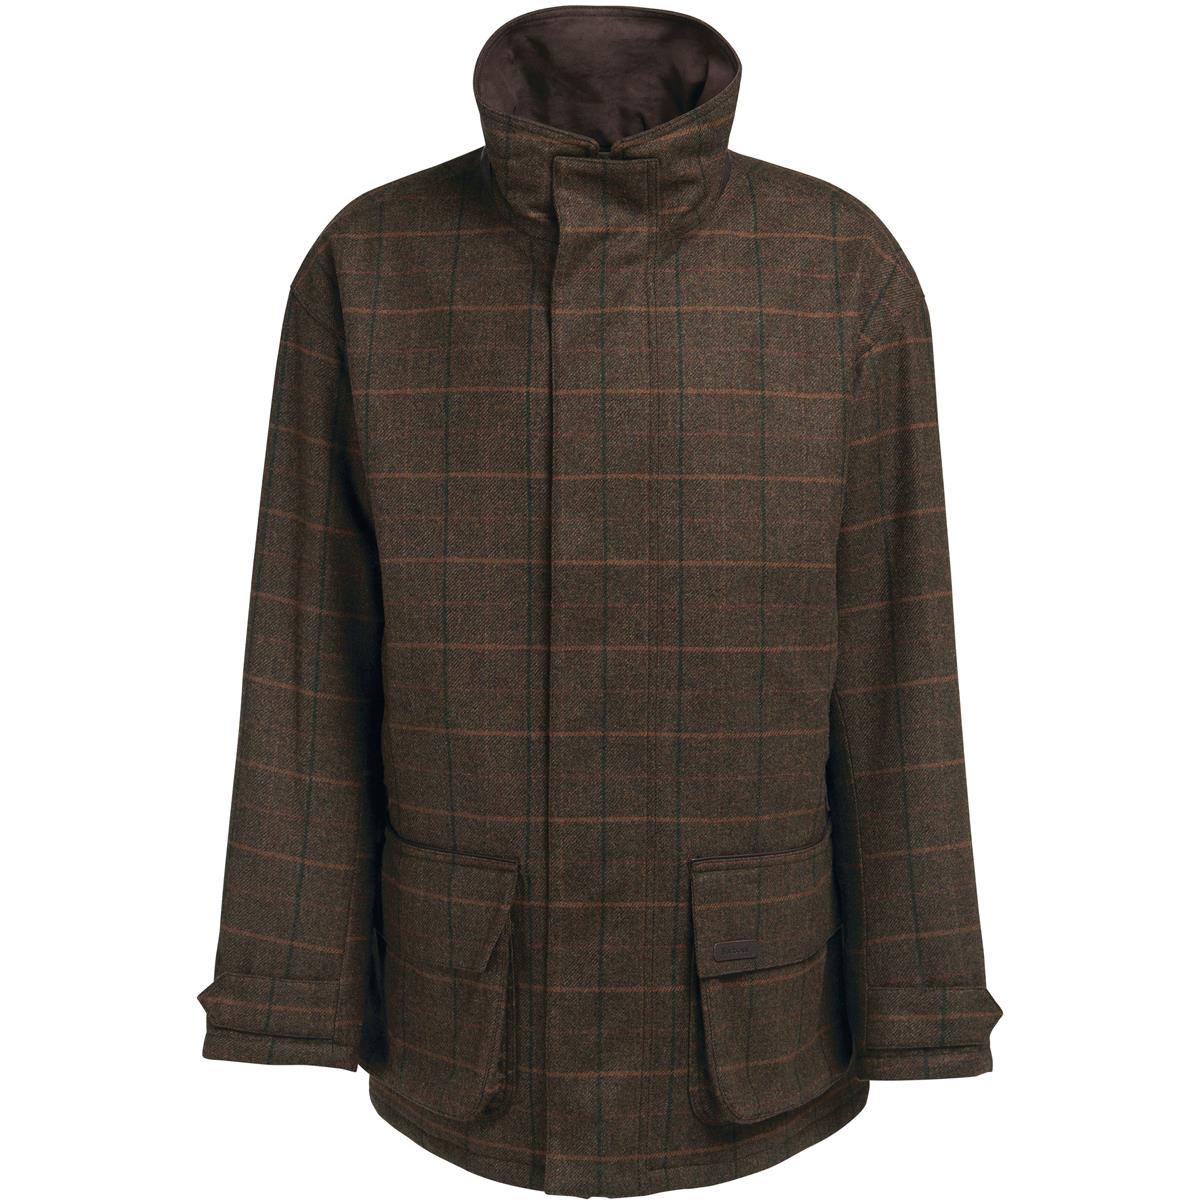 Barbour Mens Wool Beaconsfield Jacket Questions & Answers